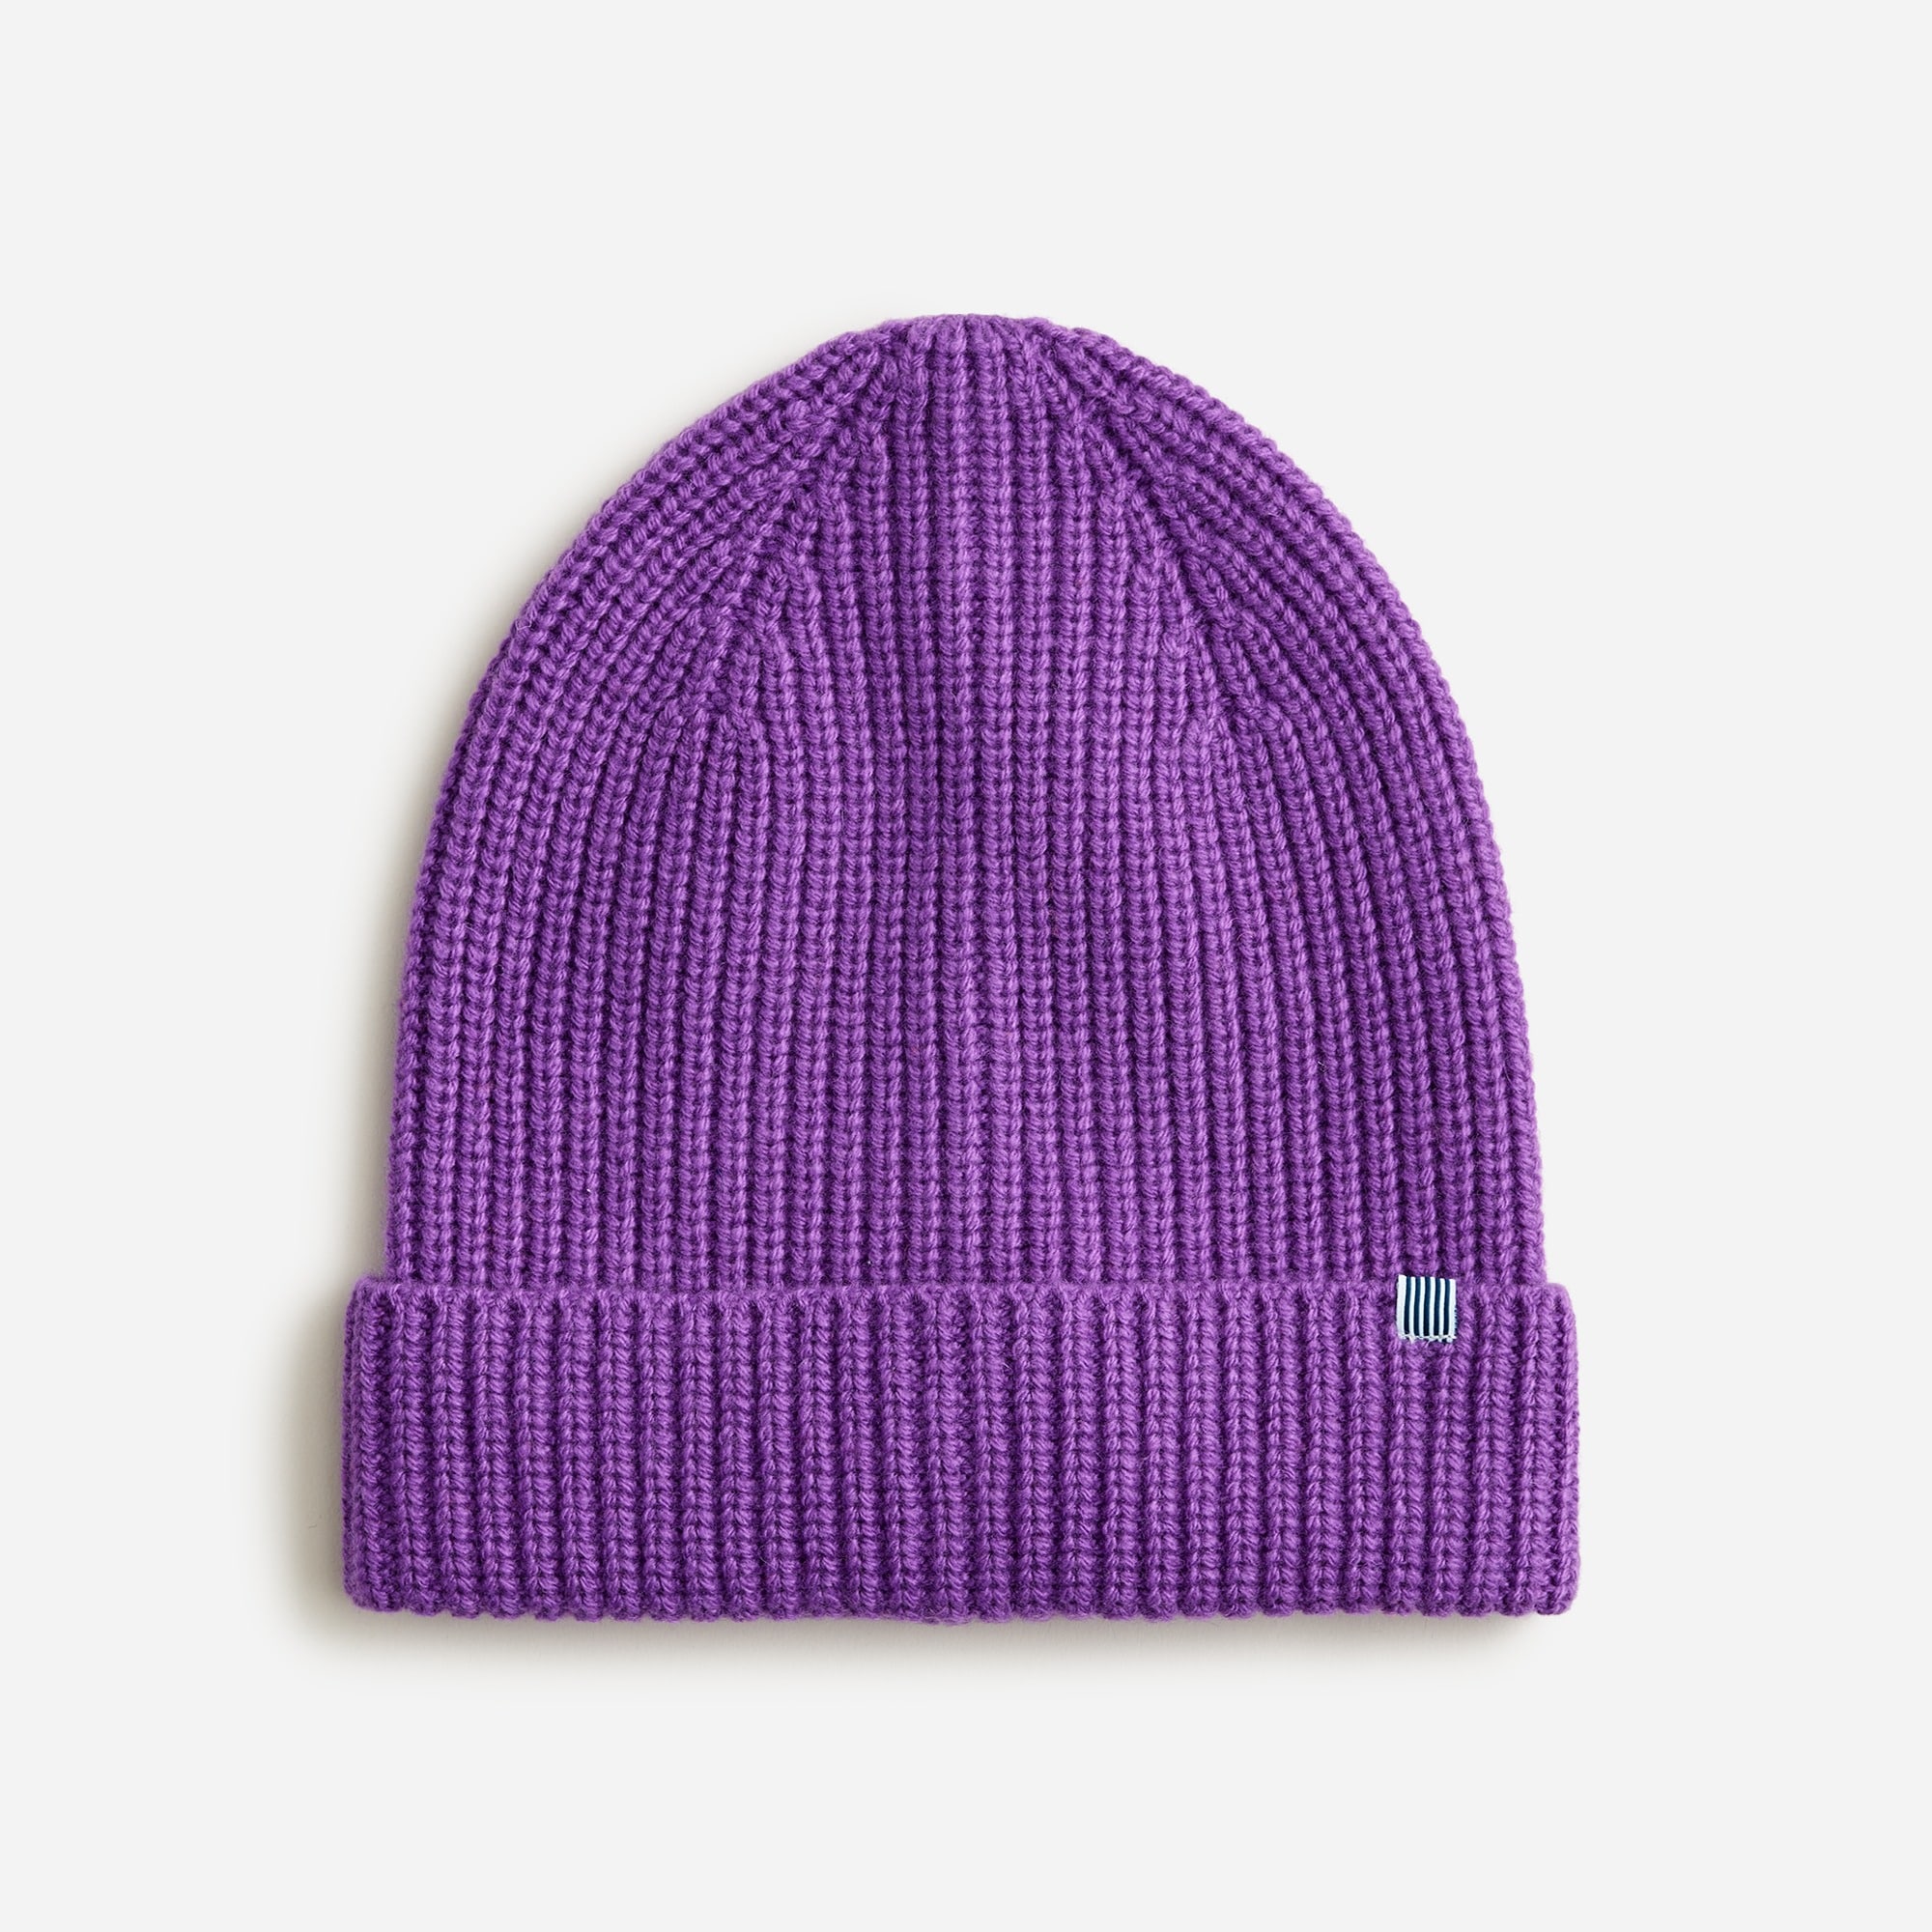  KID by crewcuts classic ribbed beanie